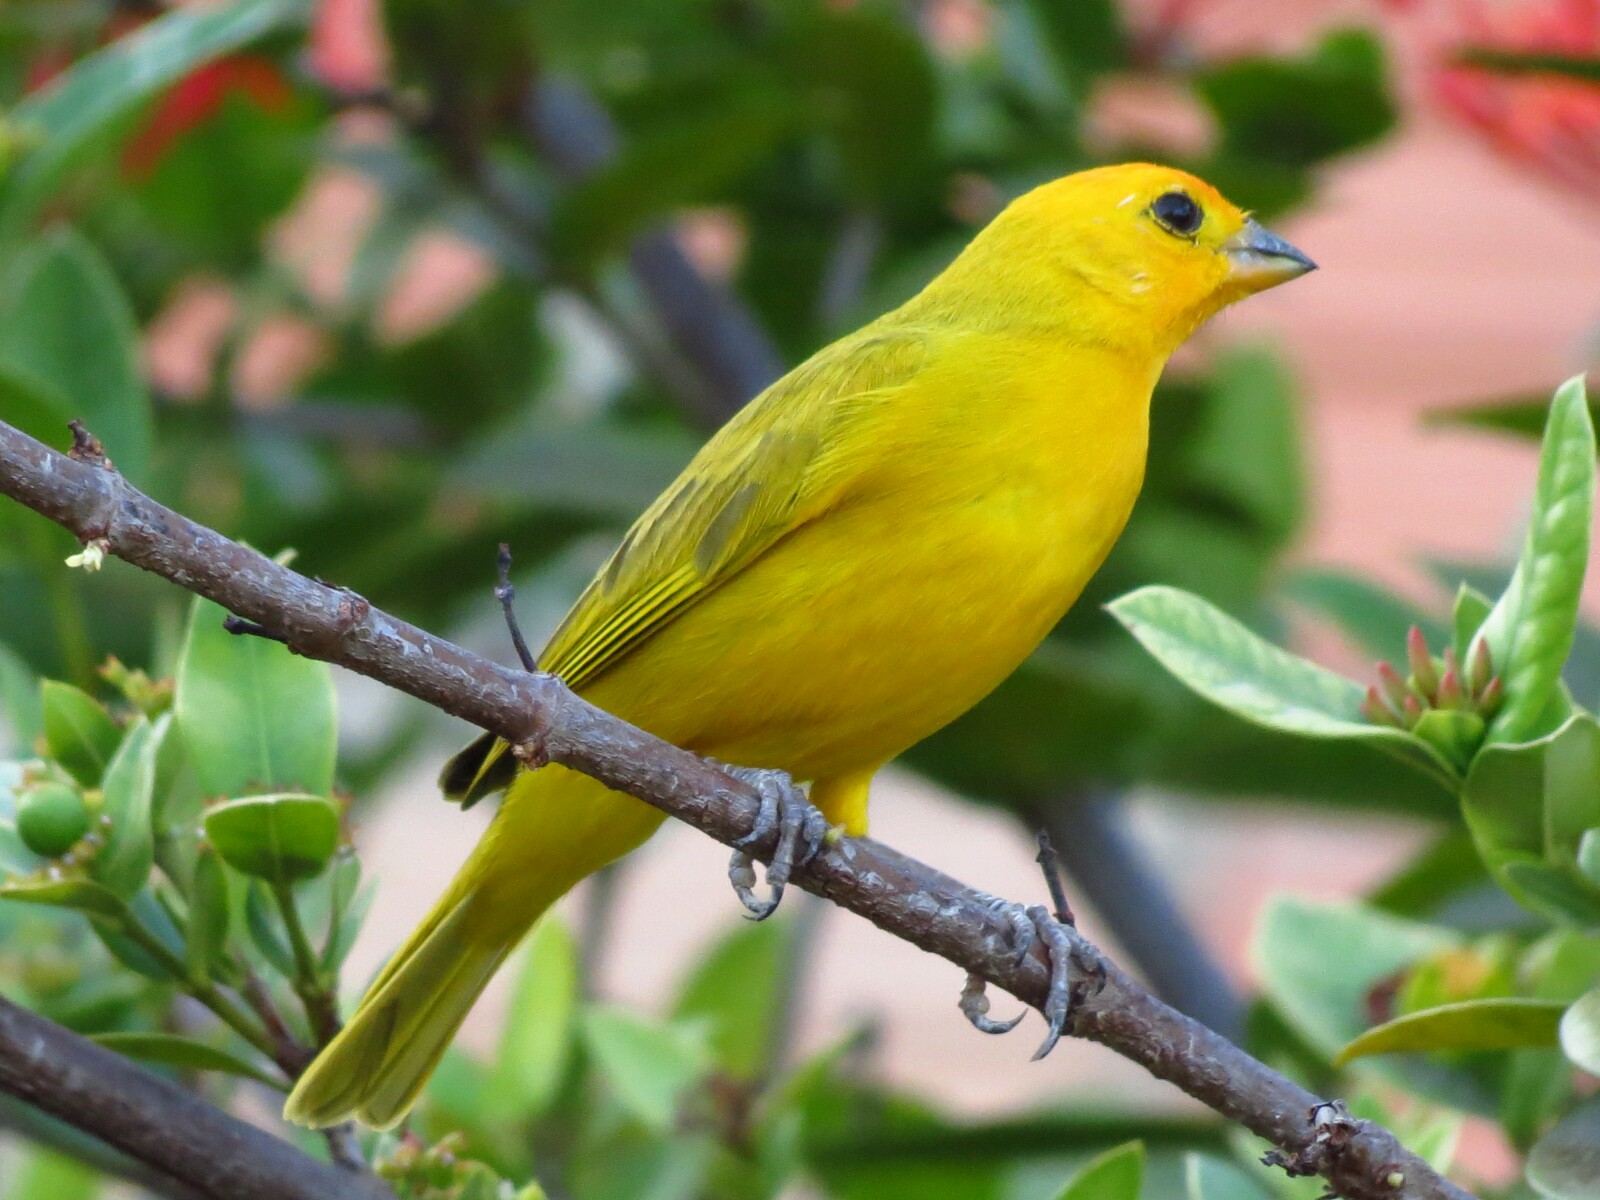 Are You a "Canary in a Coalmine" for EMF Sensitivity?